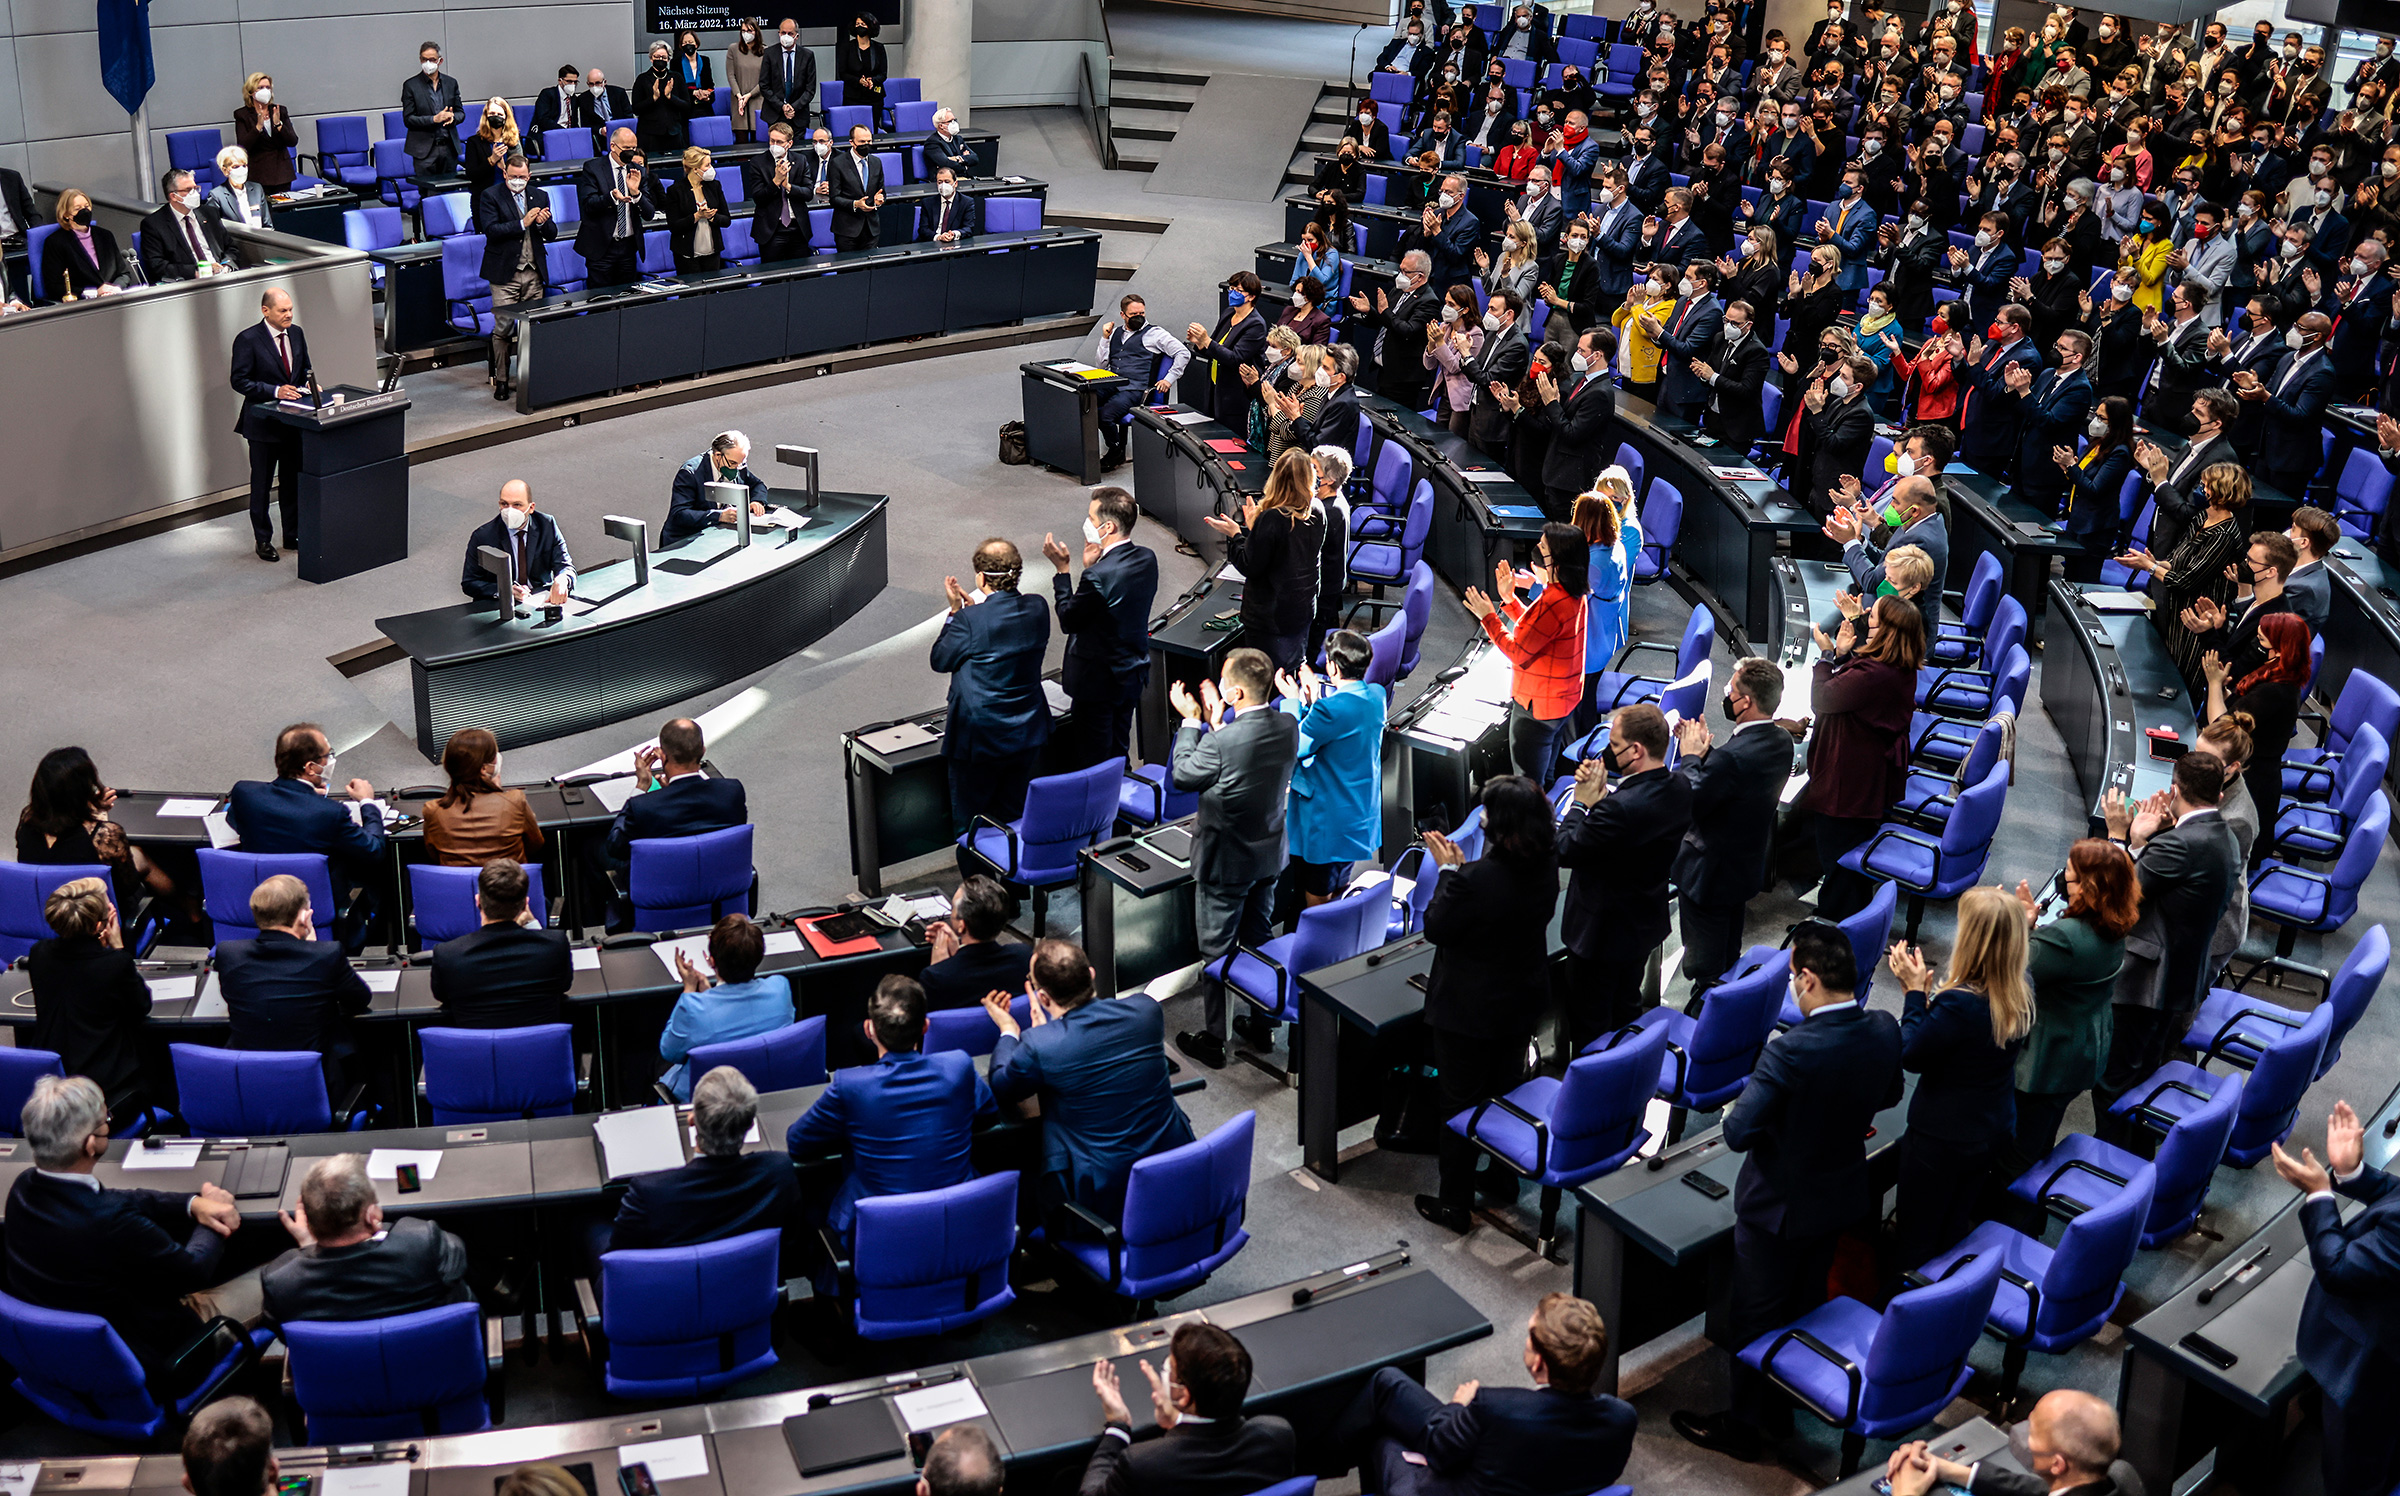 Scholz receives a standing ovation after his speech to the German Parliament on Feb. 27 (Hannibal Hanschke—Getty Images)